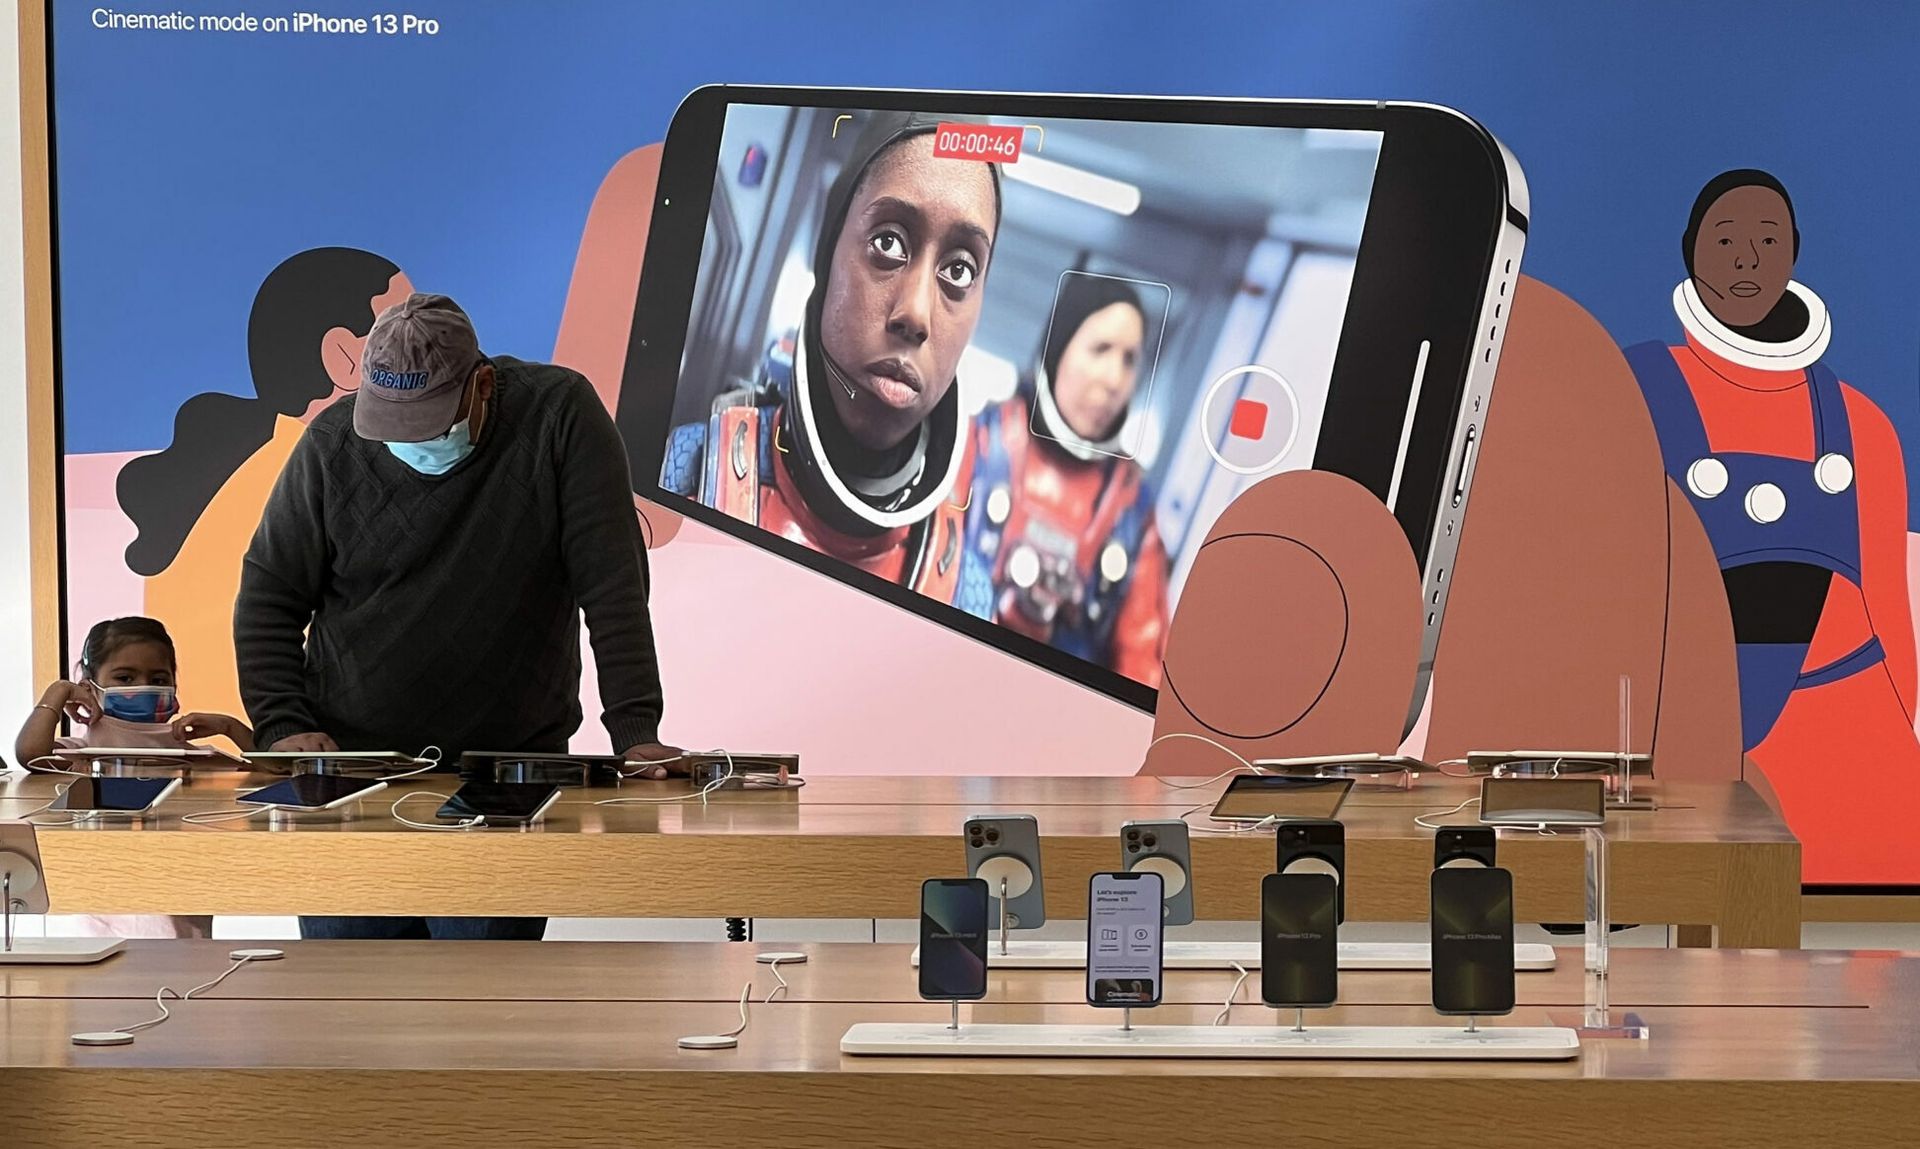 CORTE MADERA, CALIFORNIA &#8211; JANUARY 27:  New iPhone 13s are displayed at an Apple store on January 27, 2022 in Corte Madera, California. Apple reported record first-quarter earnings with $123.9 billion in overall revenue and $34.6 billion in profit. (Photo by Justin Sullivan/Getty Images)